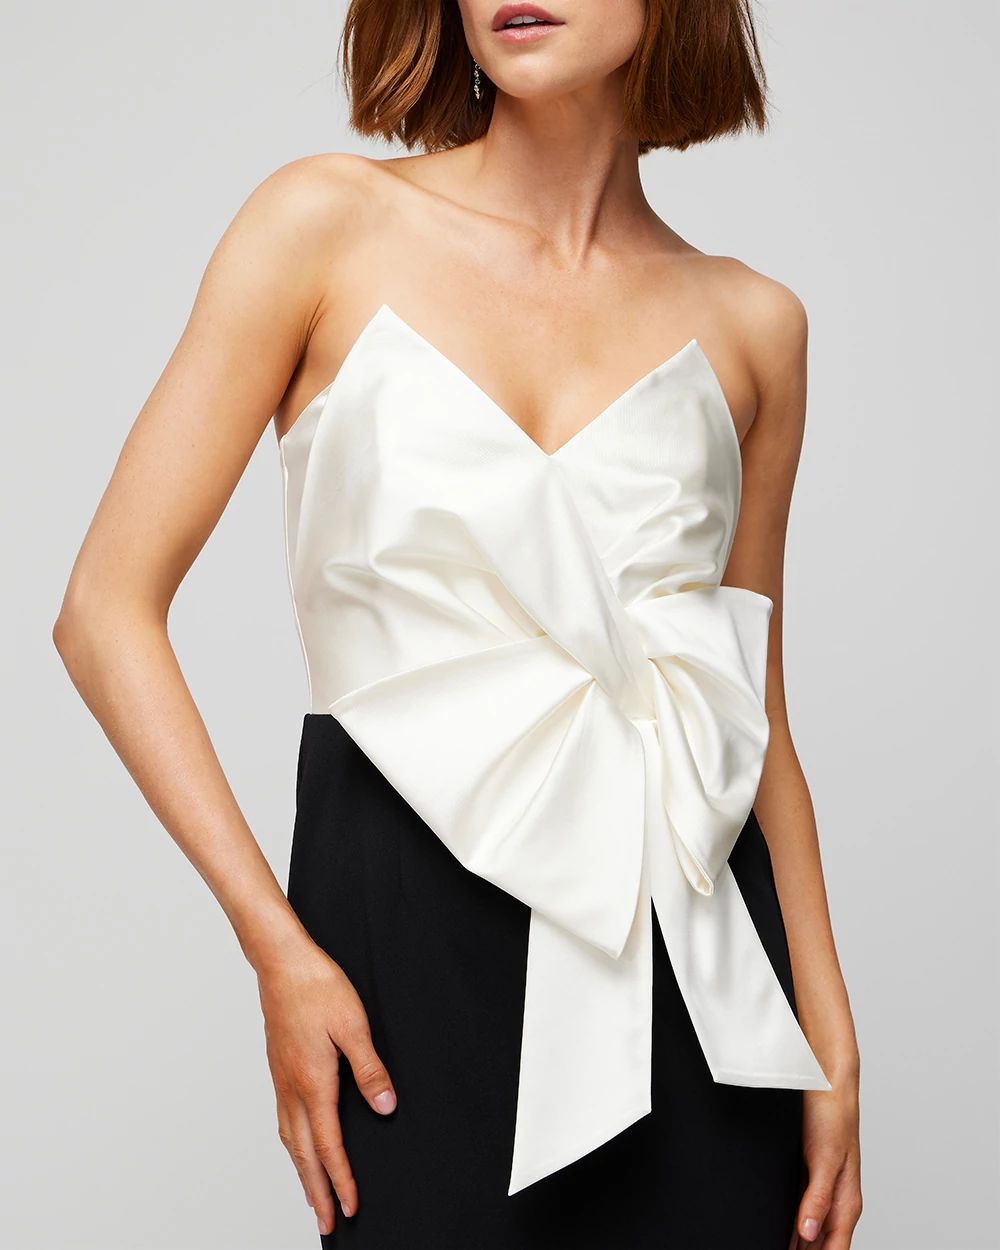 Strapless Contrast Bow Dress